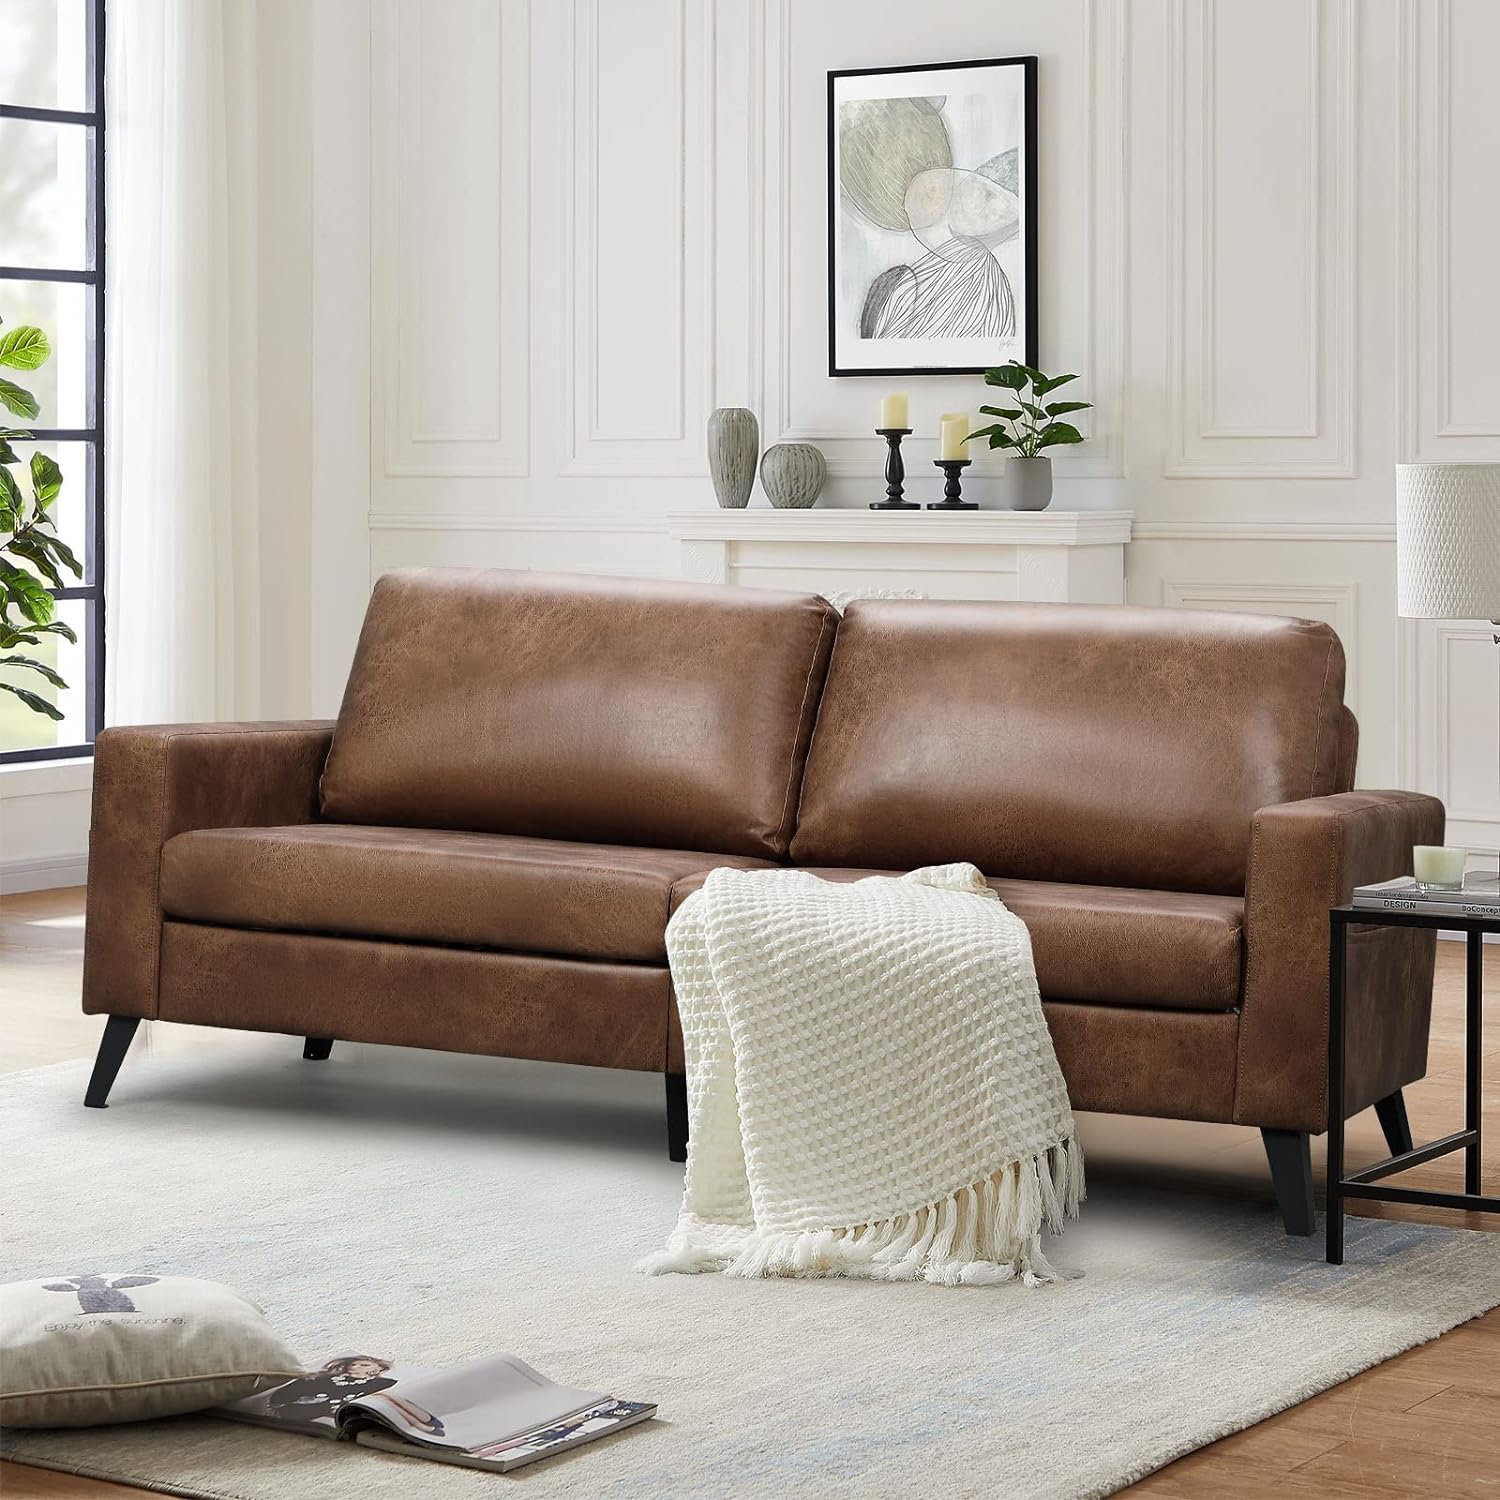 Streamlined Leather Sofa with a Sleek Look